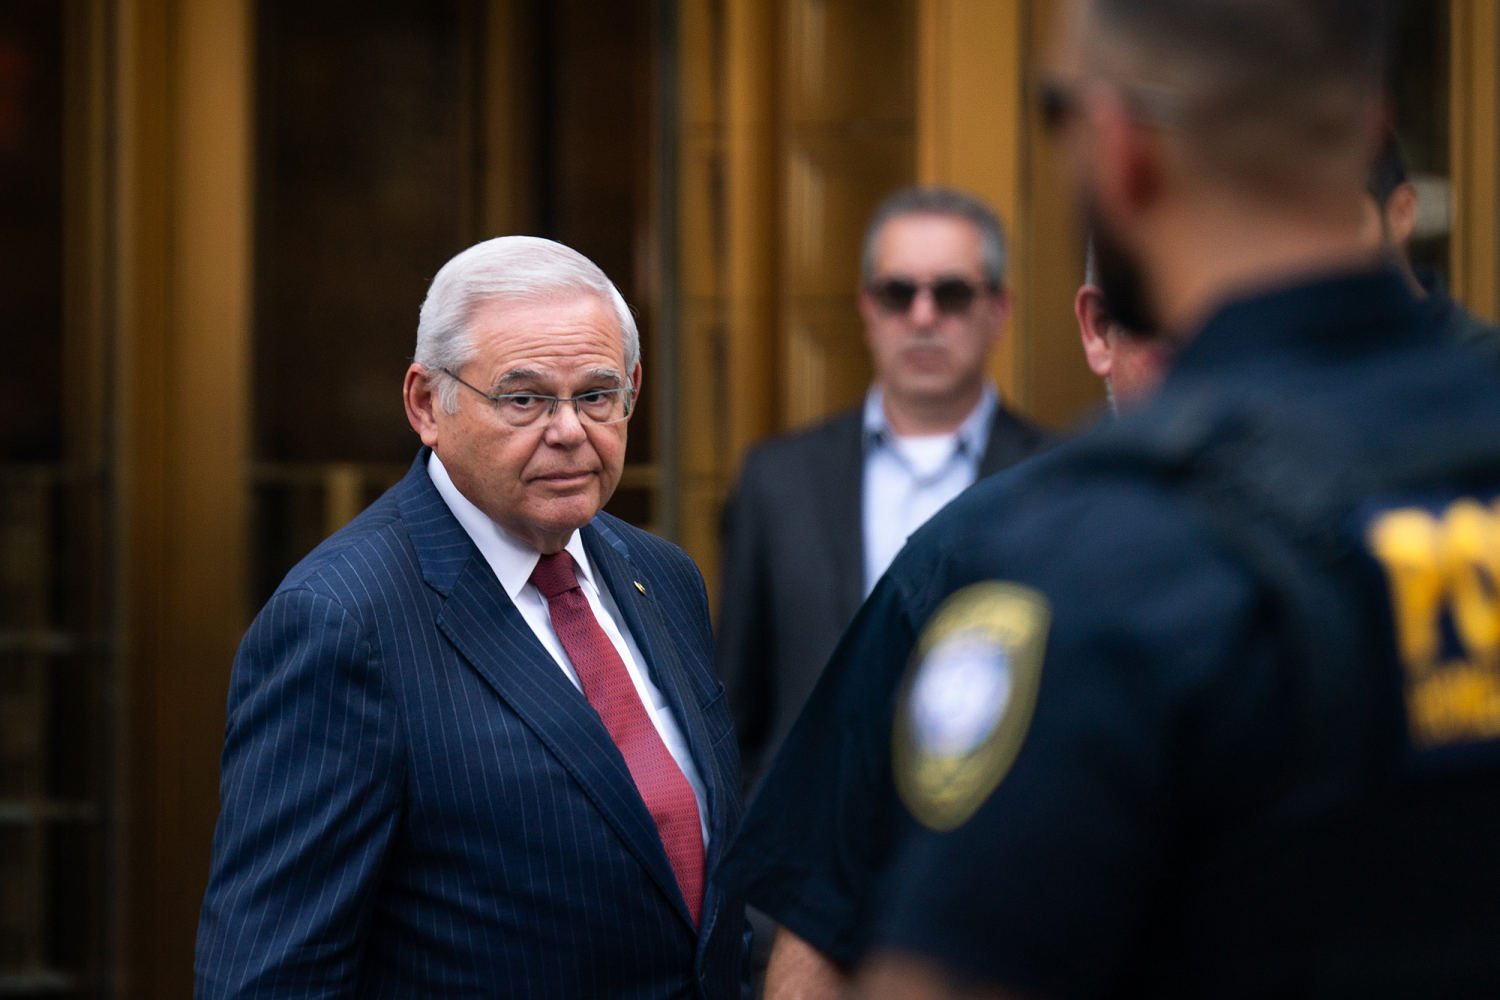 In Bob Menendez's hometown, his influence lingers and few dare to publicly criticize him